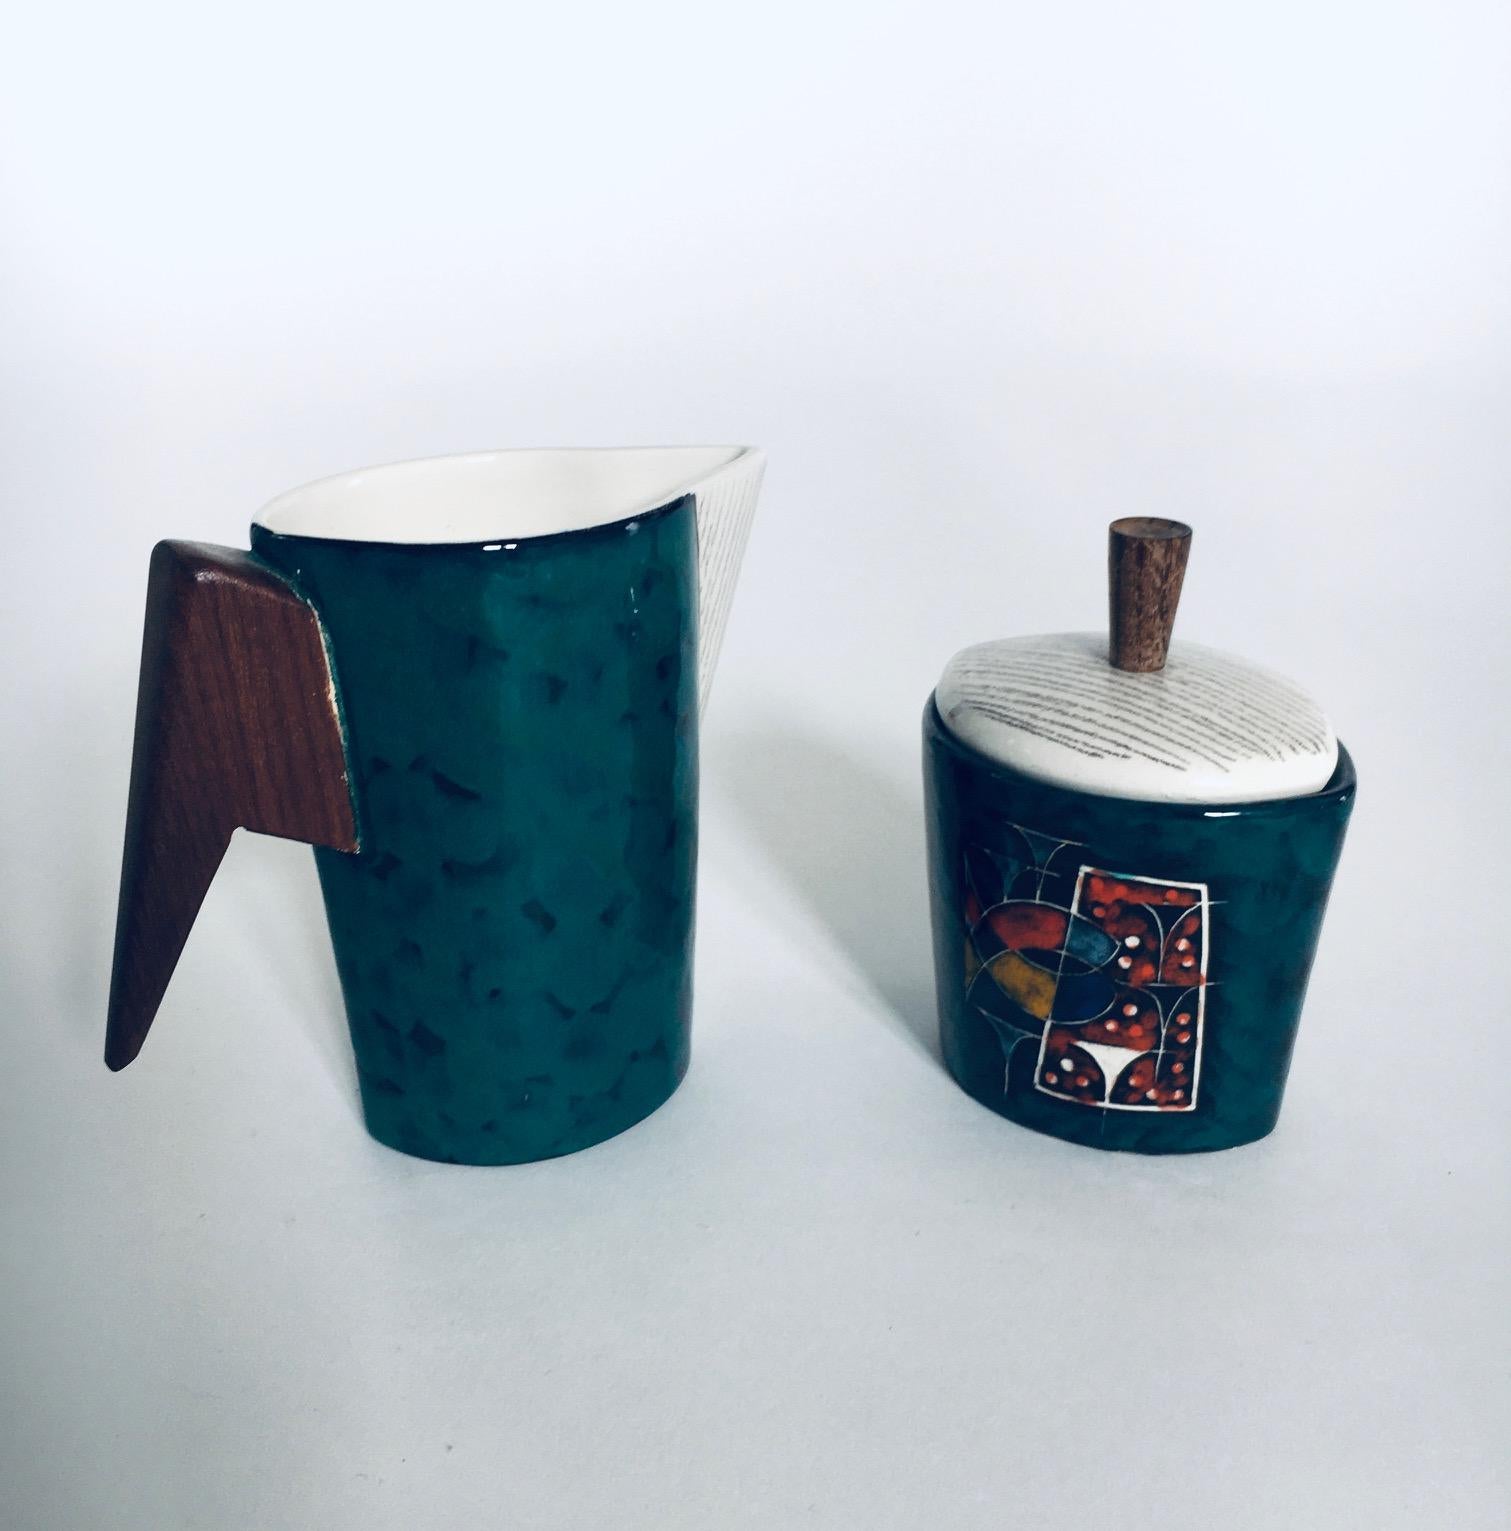 Midcentury Modern Art Ceramic Tea or Coffee Service Set by CEMAS, Italy 1950's For Sale 6